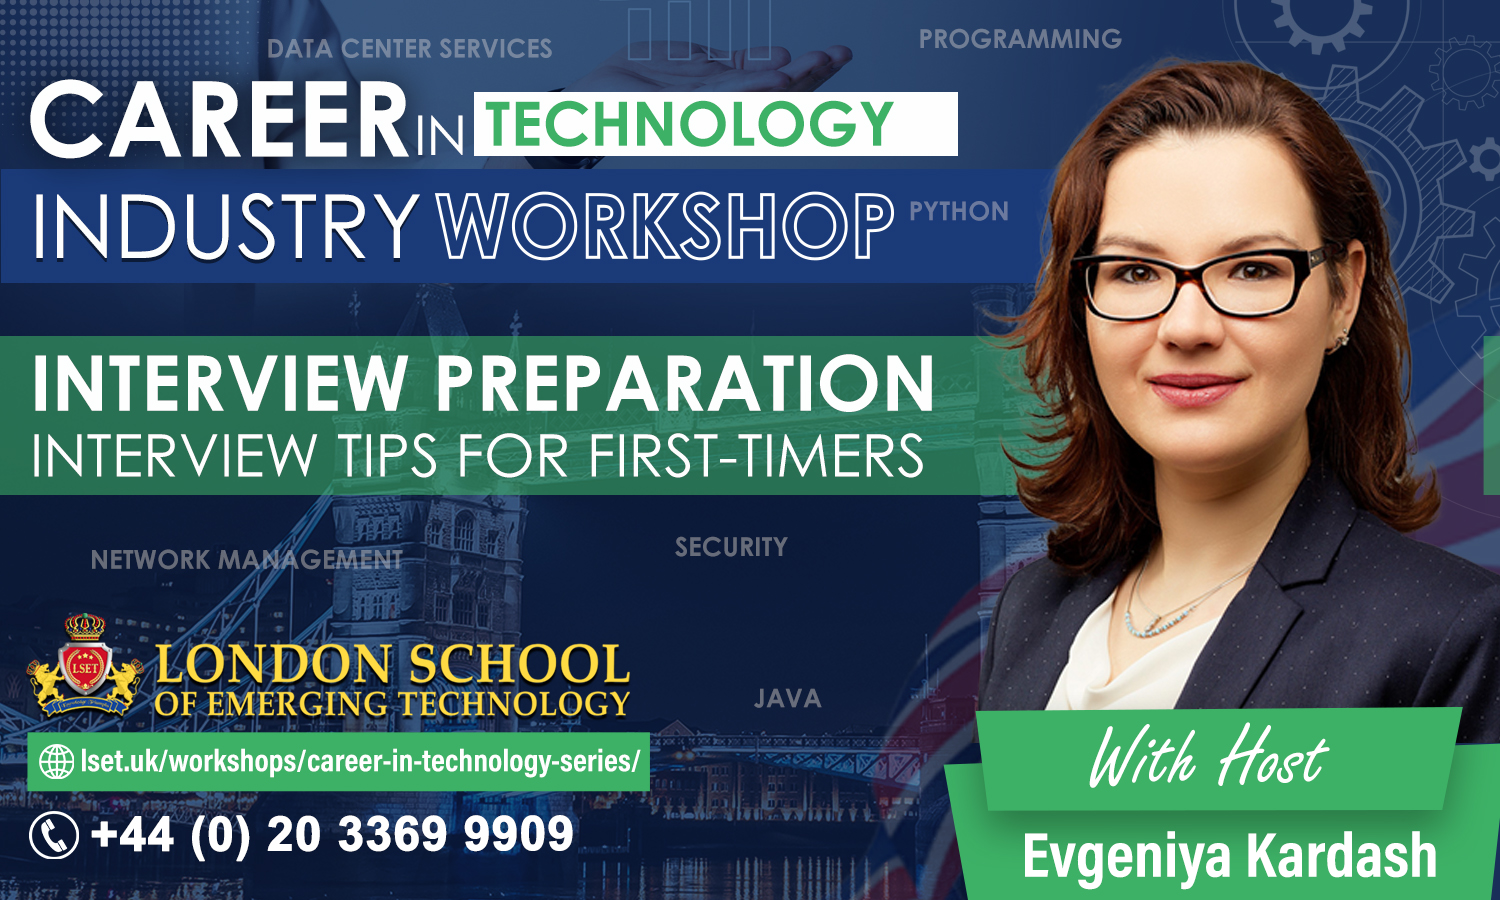 London School of Emerging Technology (LSET) has successfully organised an Interview Preparation: Interview Tips For First-Timers Workshop